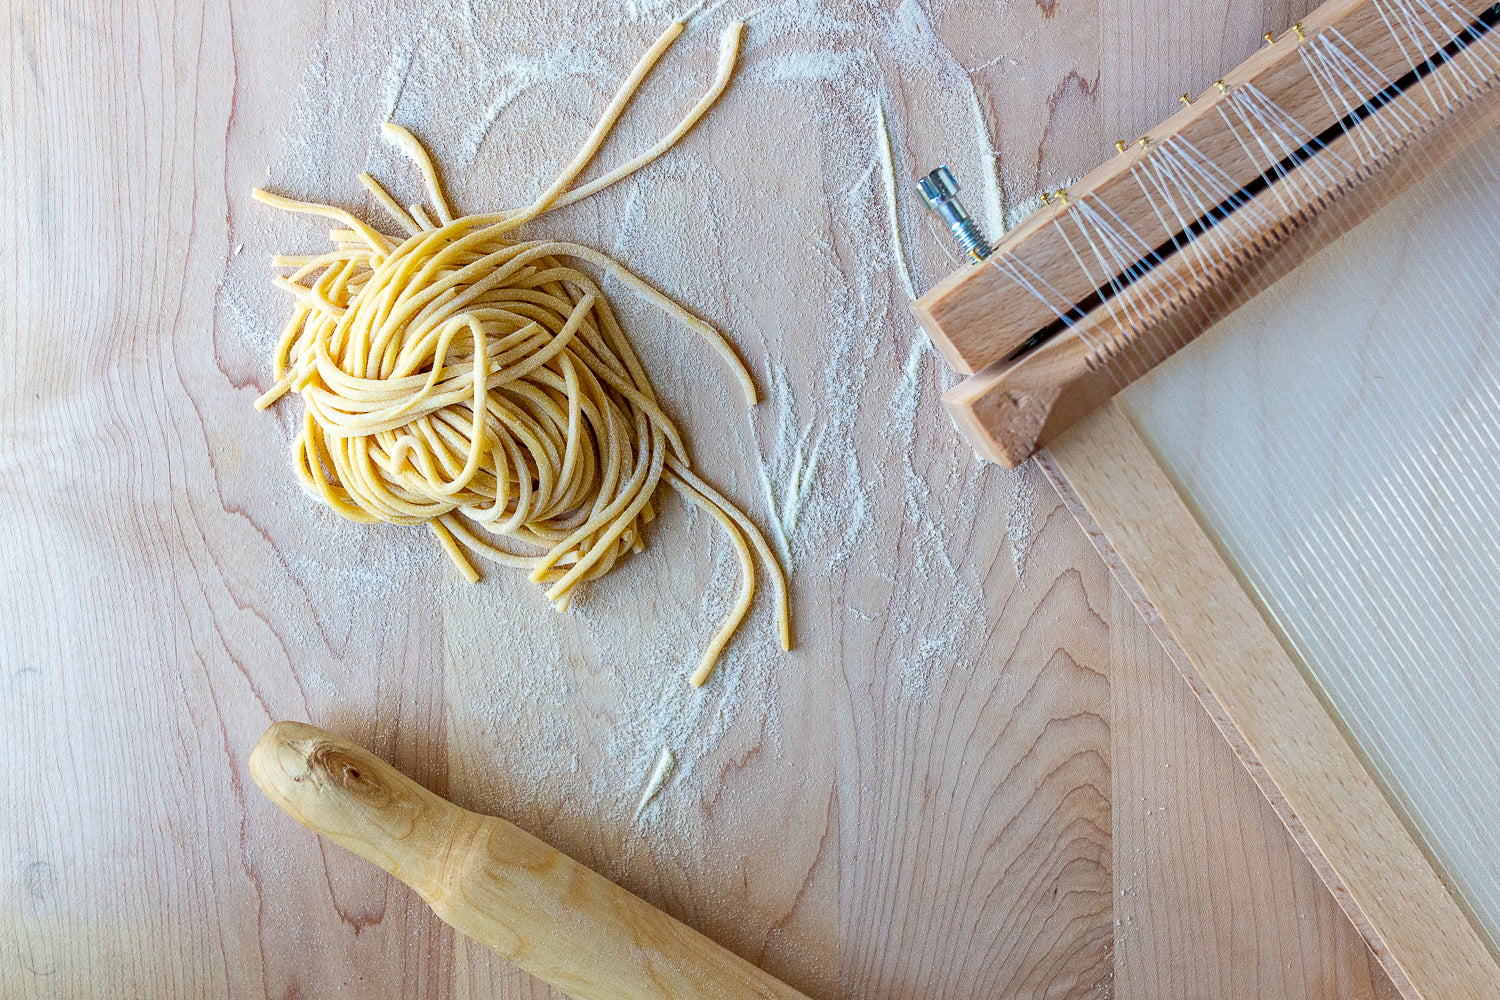 Chitarra, pasta guitar and rolling pin